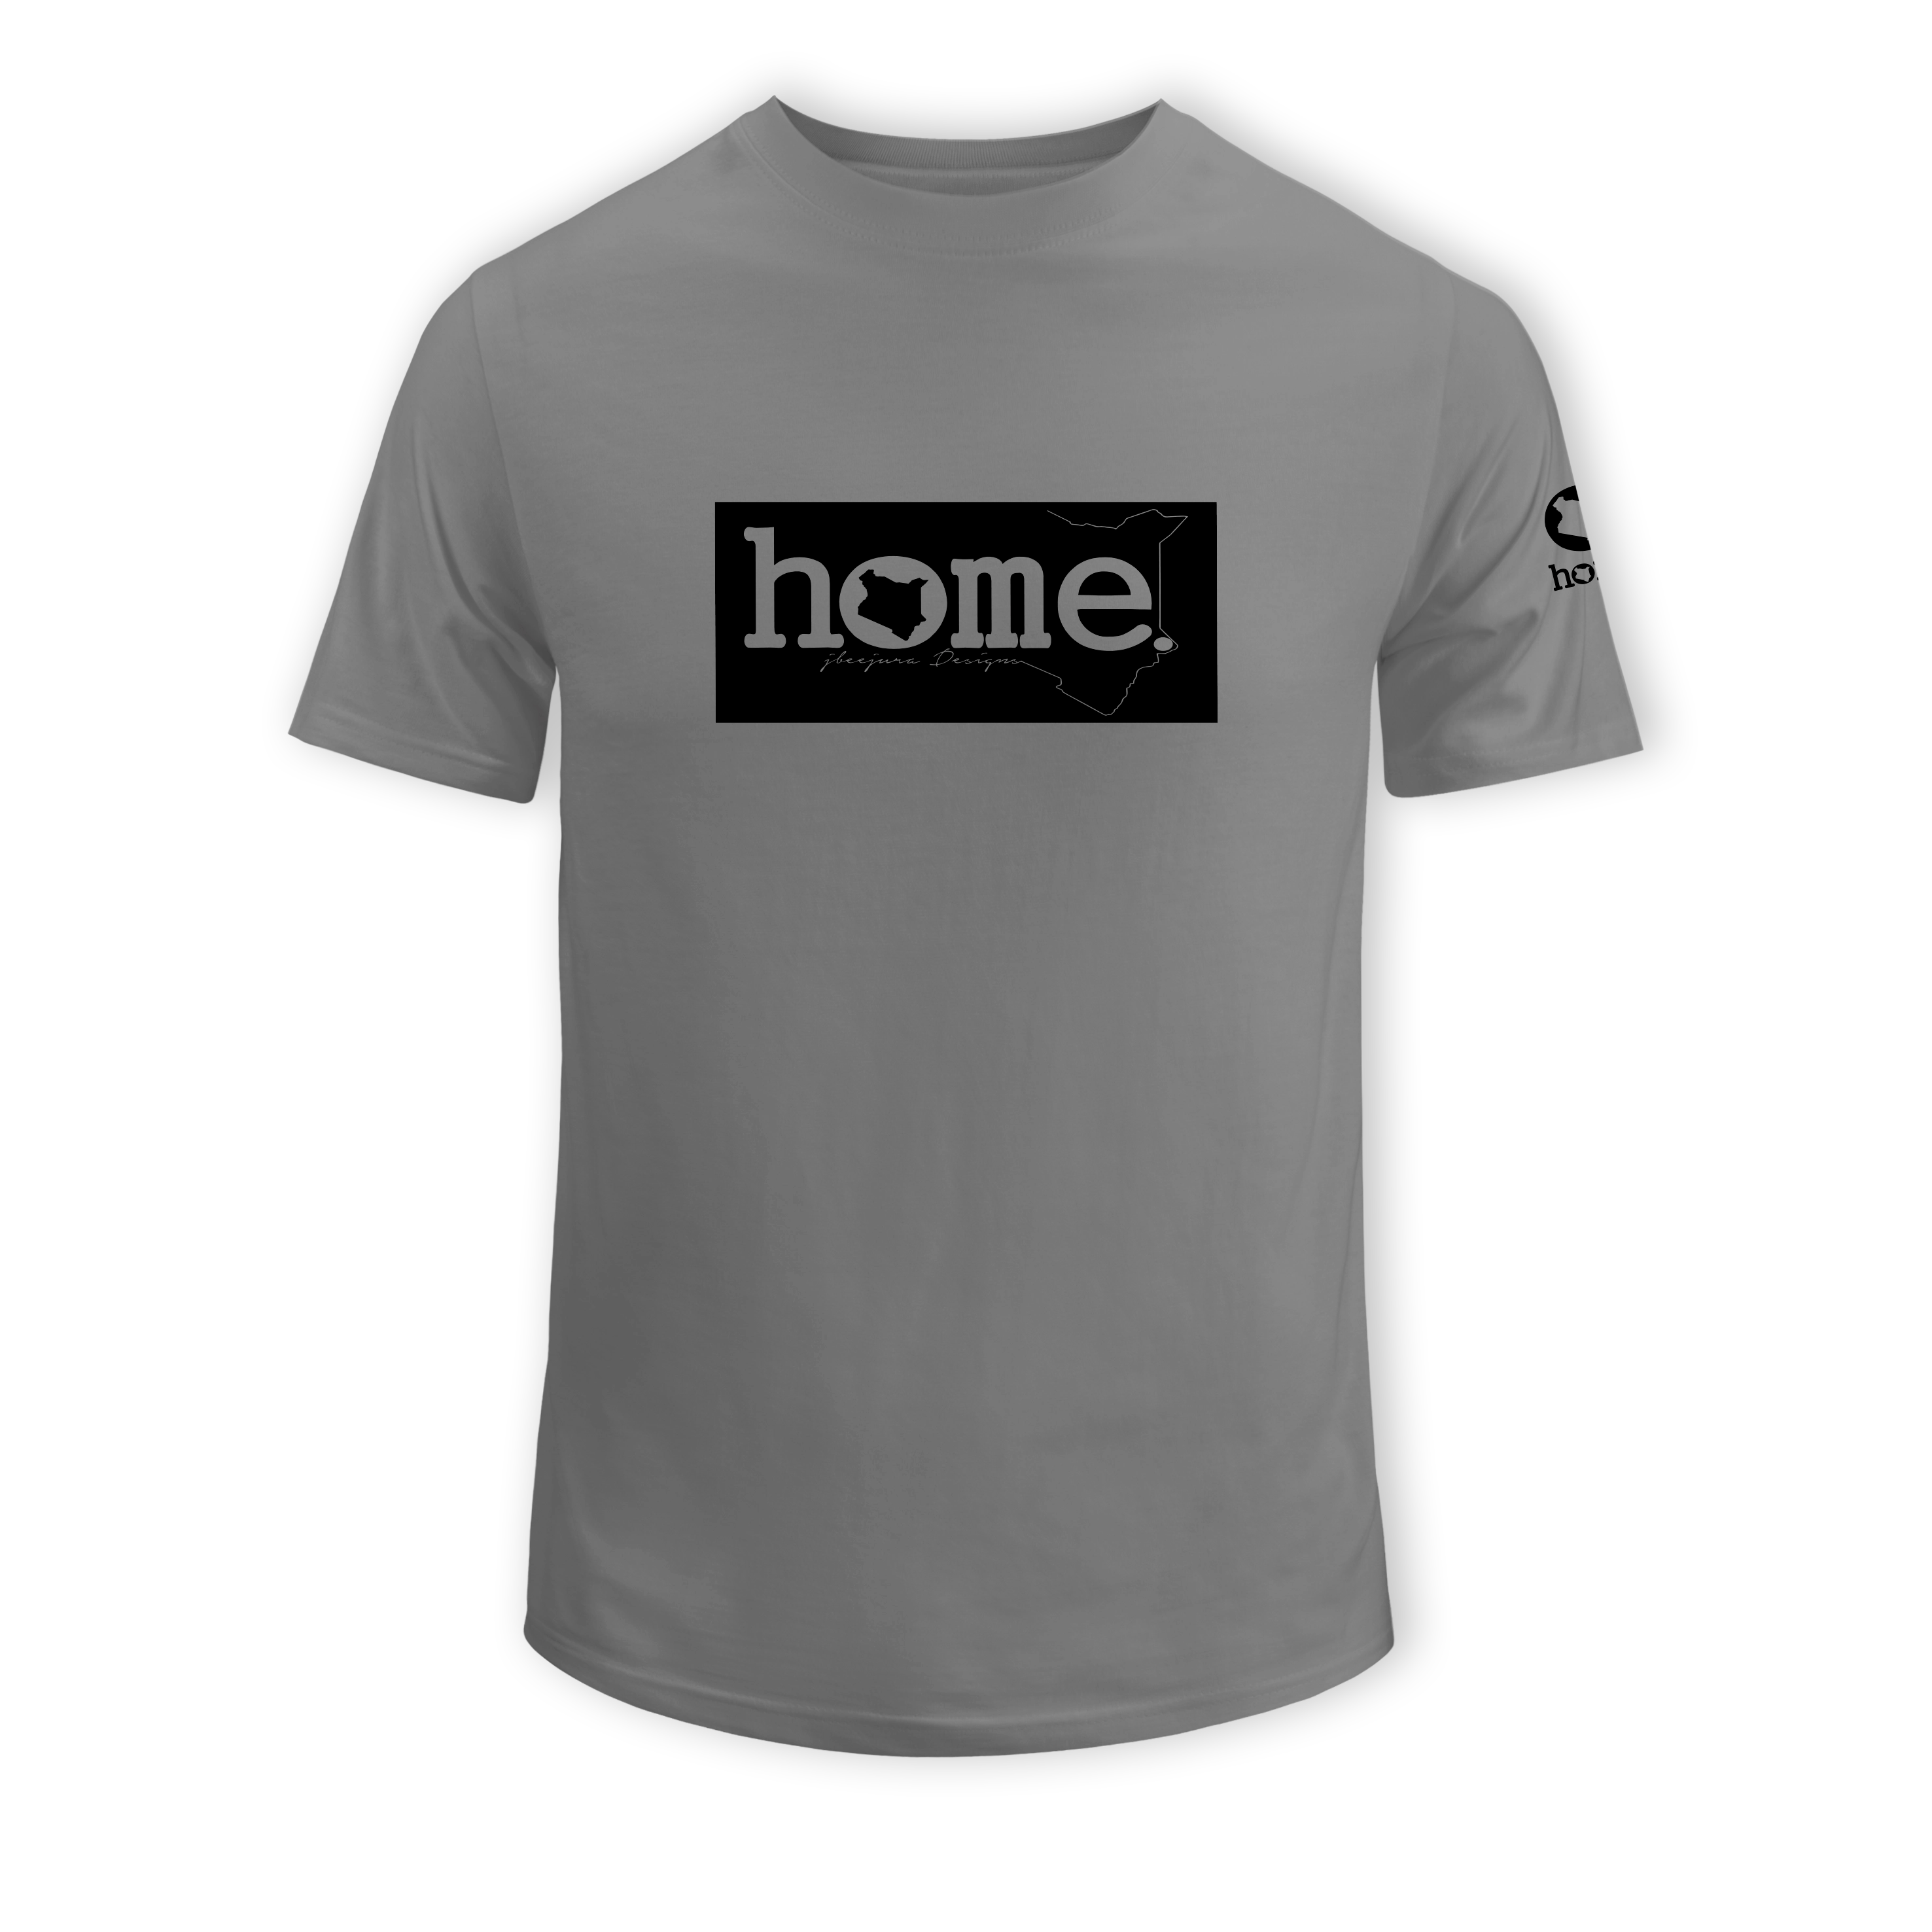 home_254 SHORT-SLEEVED SAGE T-SHIRT WITH A BLACK CLASSIC PRINT – COTTON PLUS FABRIC